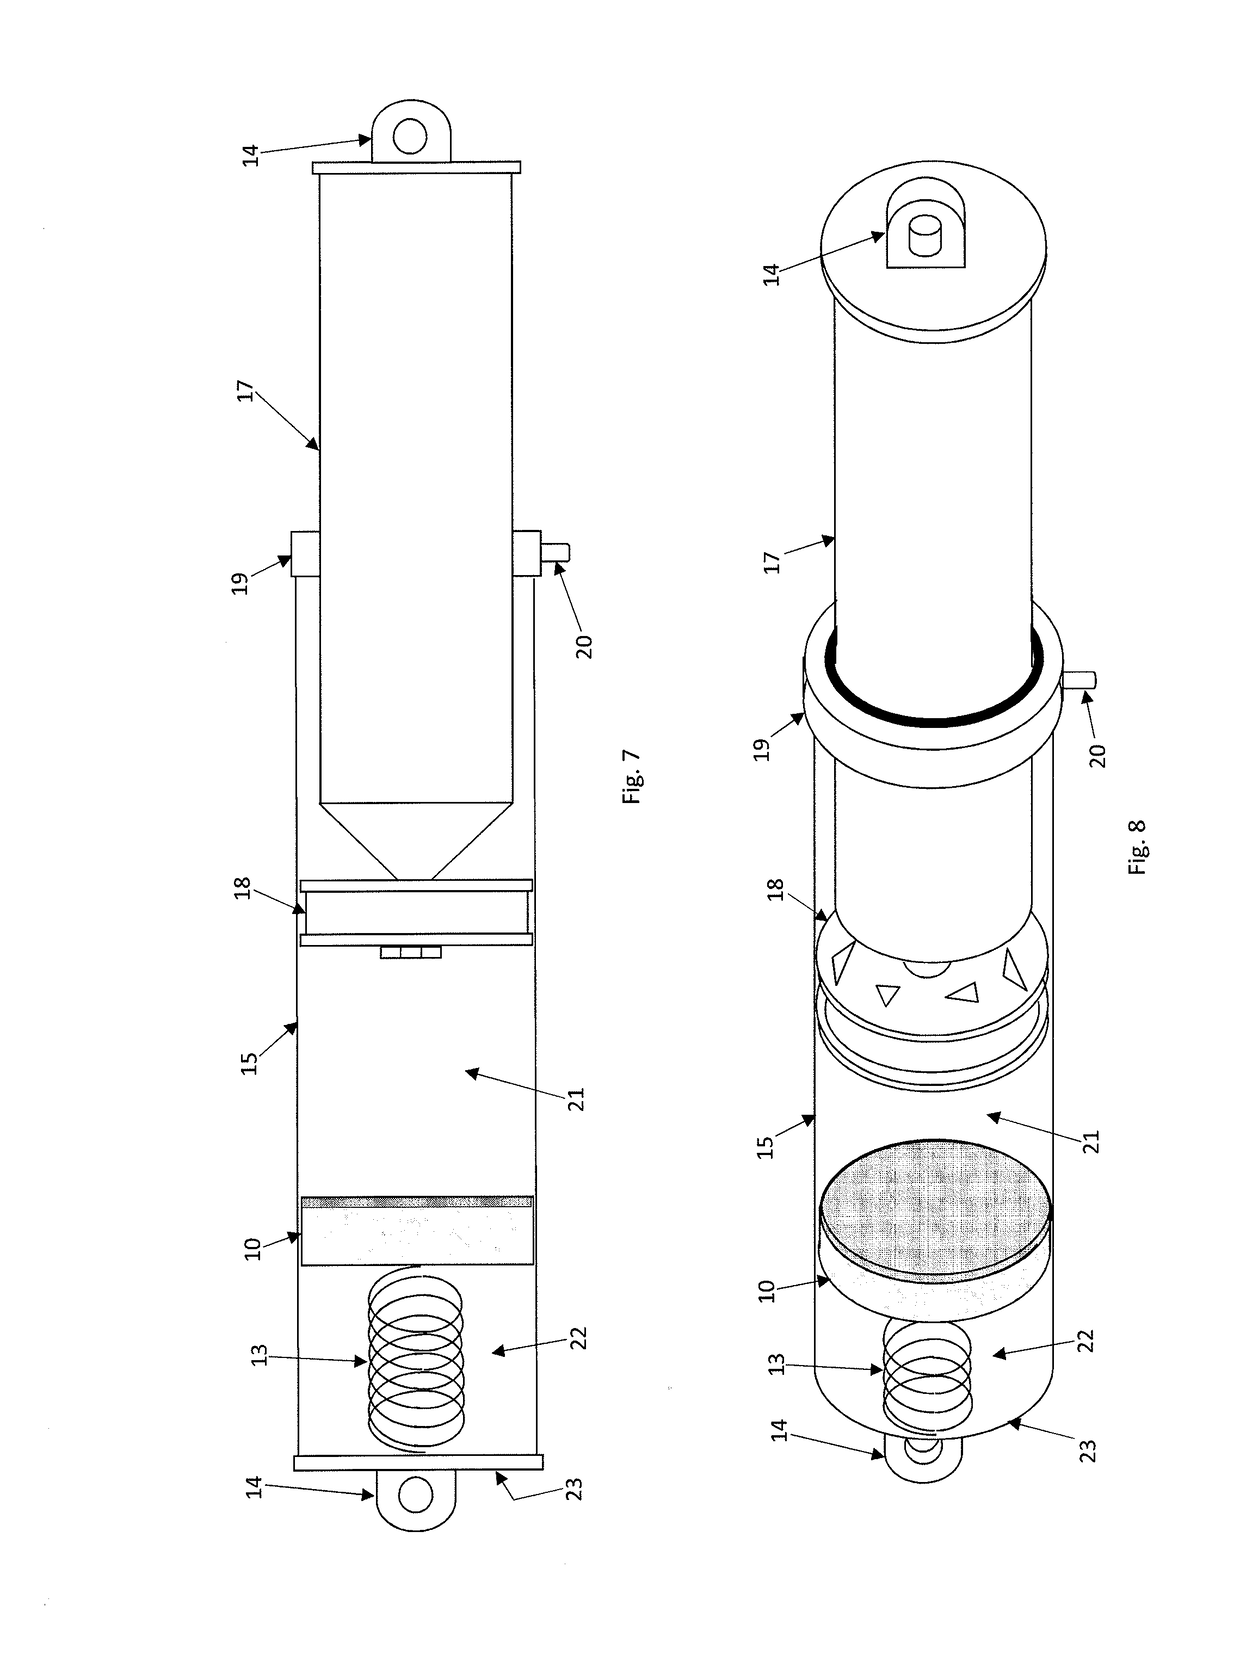 Shock absorber with gas permeable internal floating piston